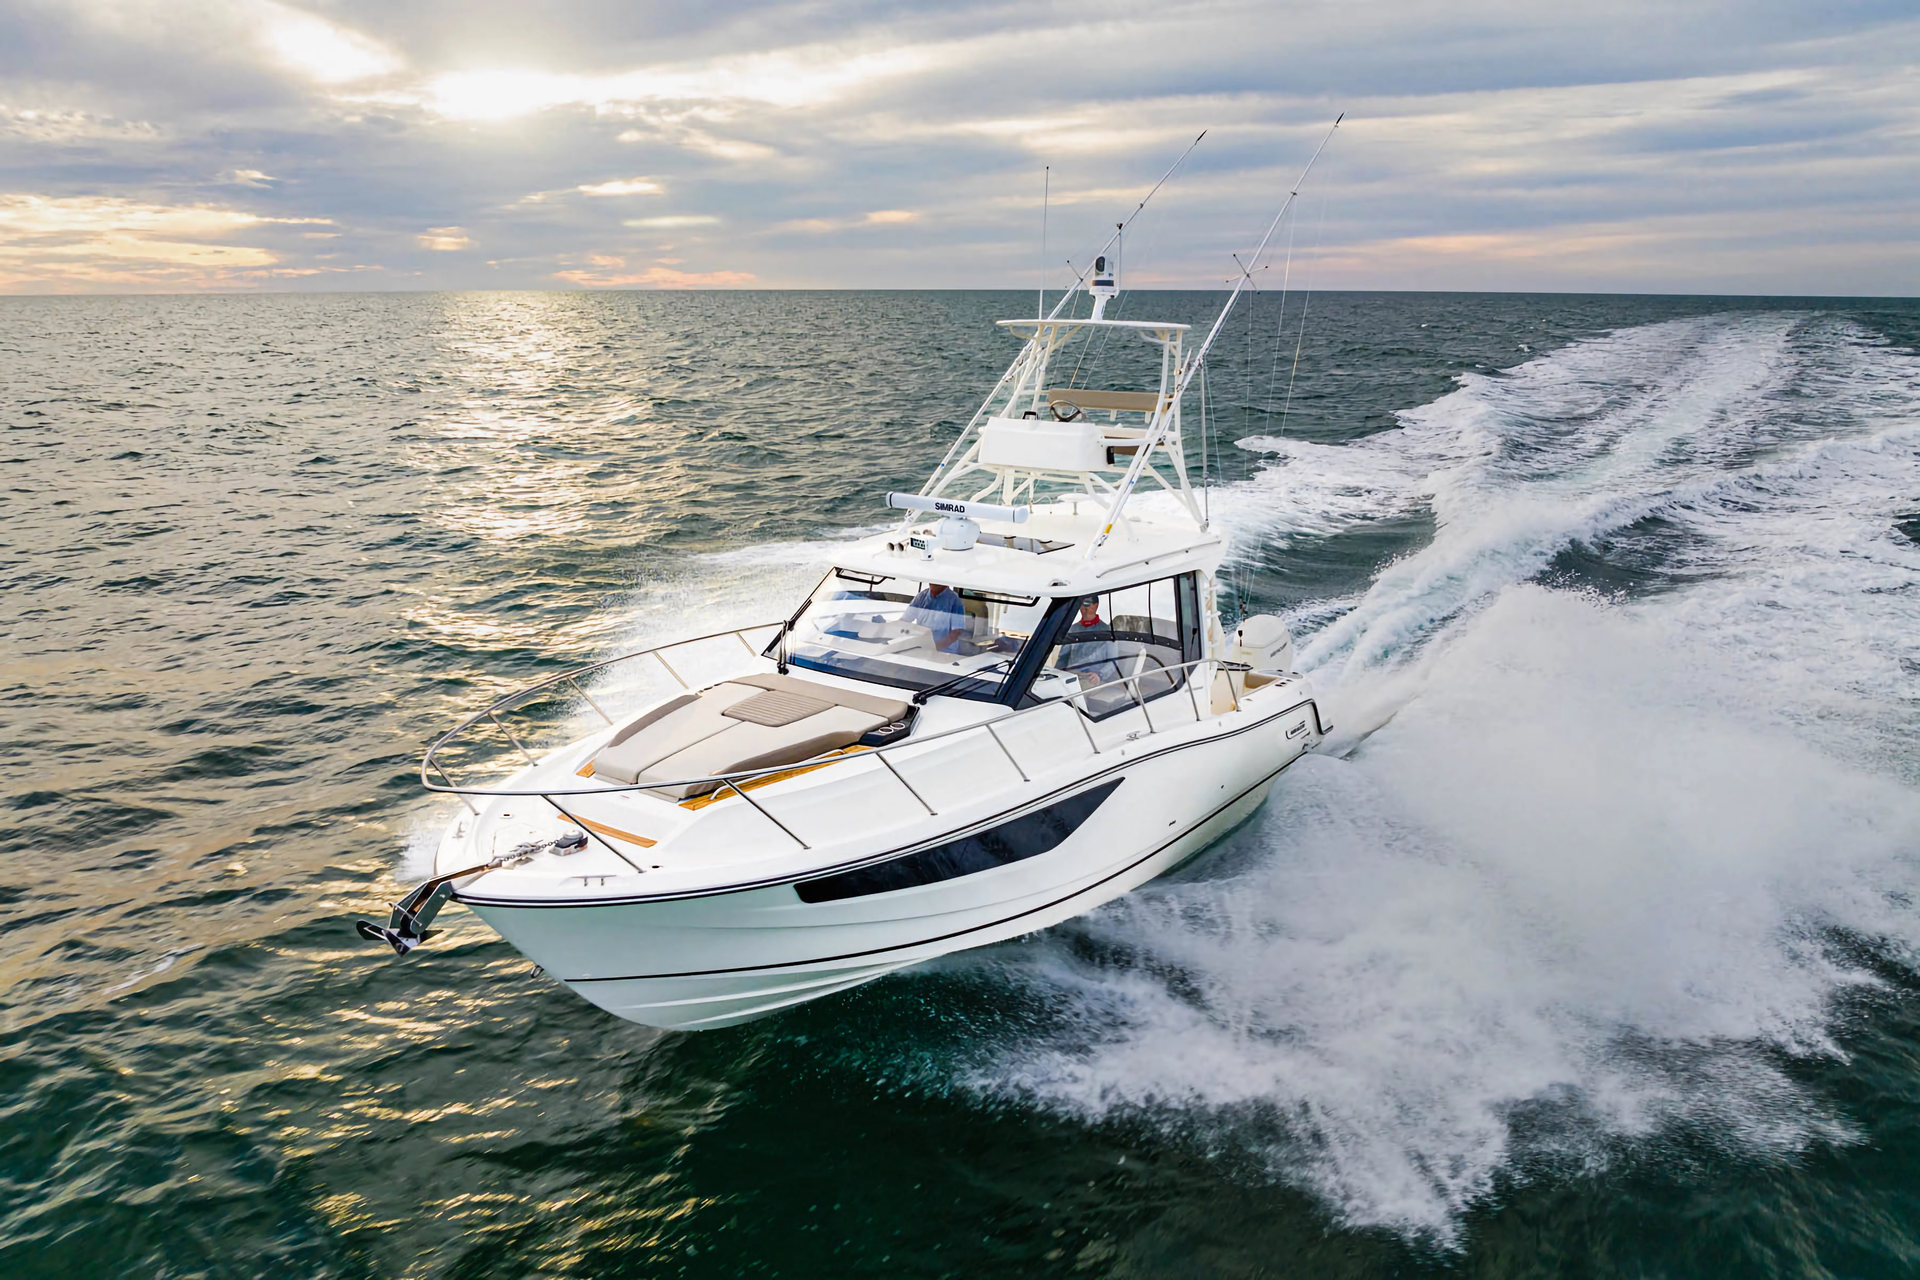 360 VR Virtual Tours of the Boston Whaler 365 Conquest